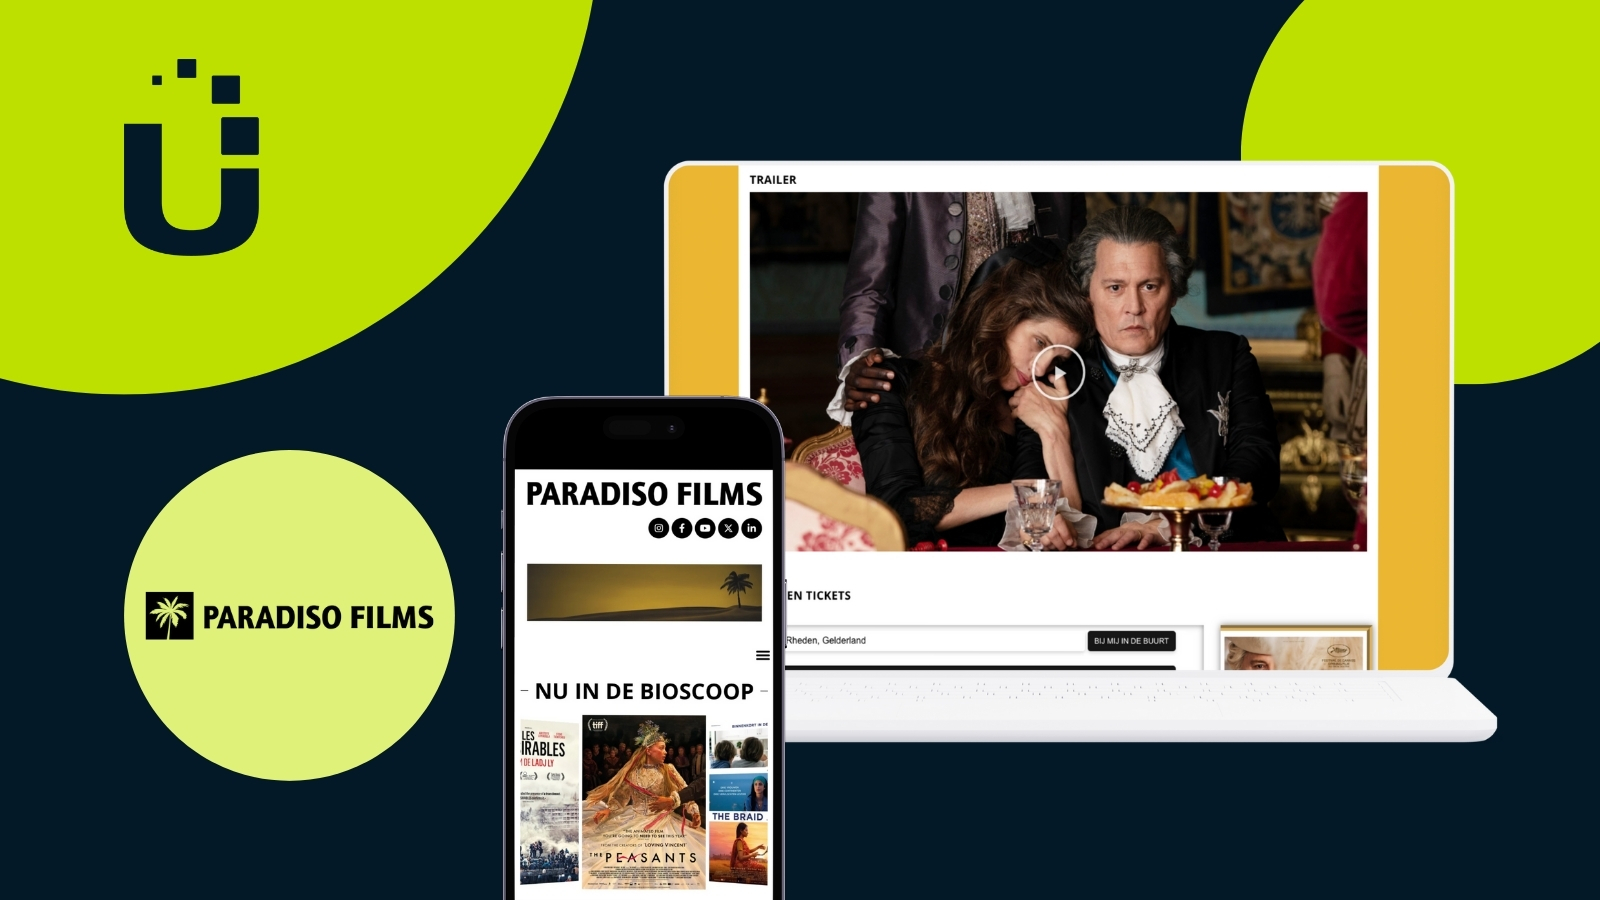 Image with a black background. The usheru logo is in the top left corner over a green circle. Below it is the Paradiso Films logo, also in a green circle. To its right is an image of a computer and a phone showing the Paradiso Films website.